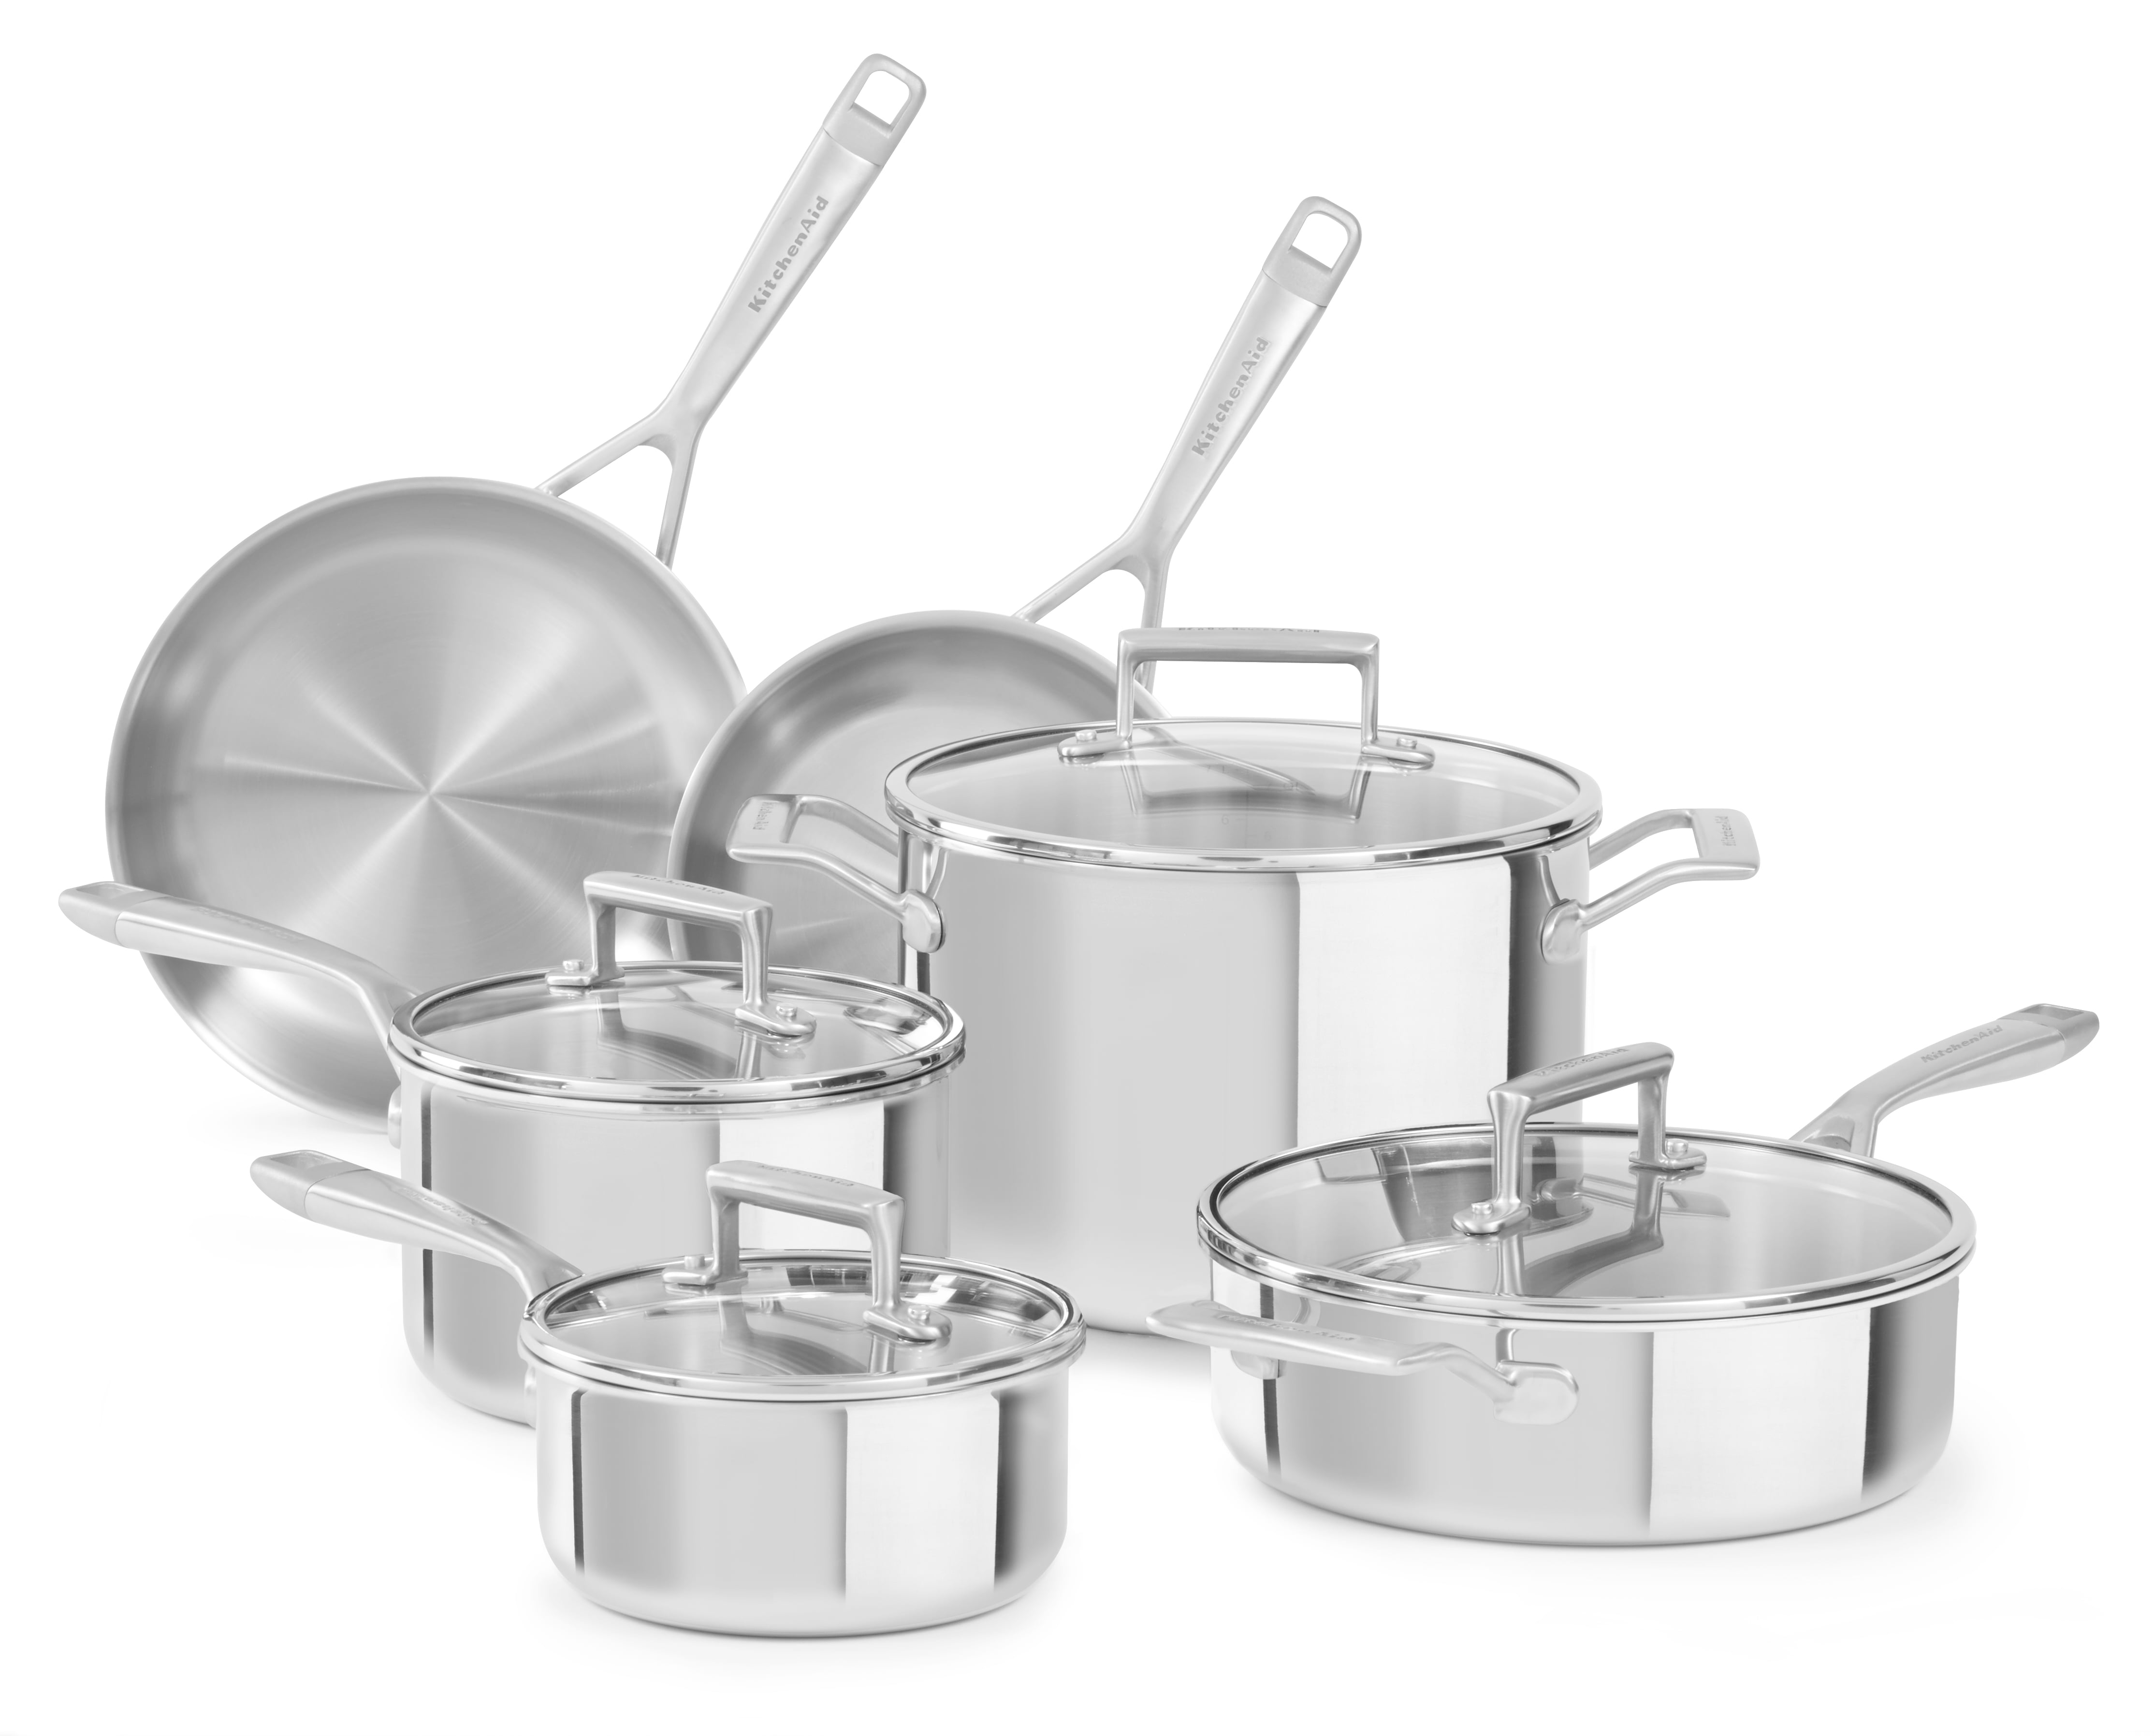 KitchenAid 11-Piece Tri-Ply Stainless Steel Cookware Set